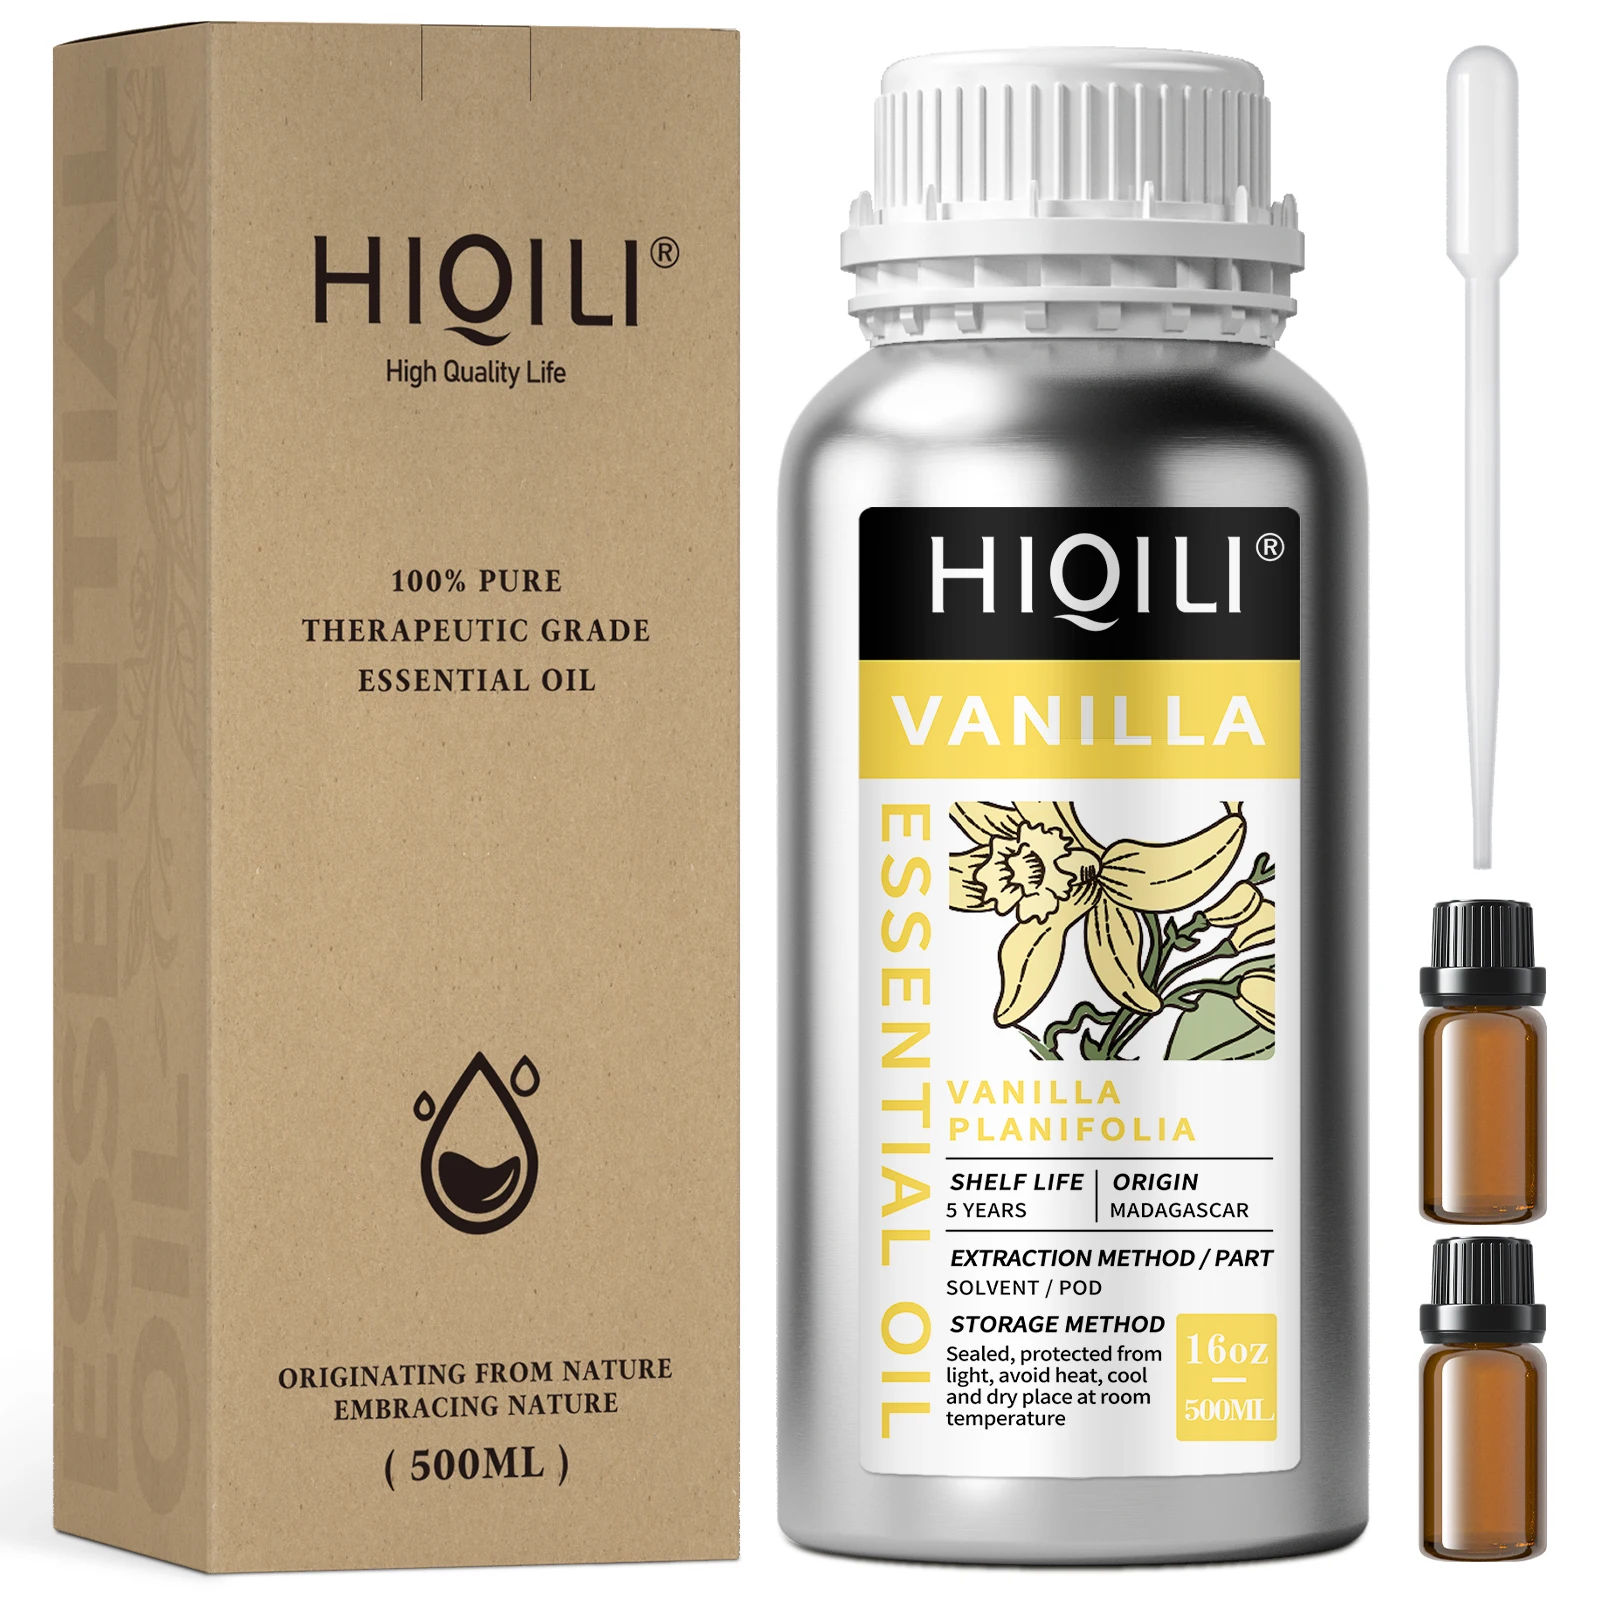 HIQILI 500ML Vanilla Essential Oils,100% Pure Nature for Aromatherapy | Used for Diffuser, Humidifier, Massage | Perfume DIY manufacturer 100% organic pure essential oil oem odm natural aromatherapy 500ml sandalwood fragrance essential oils for diffuser